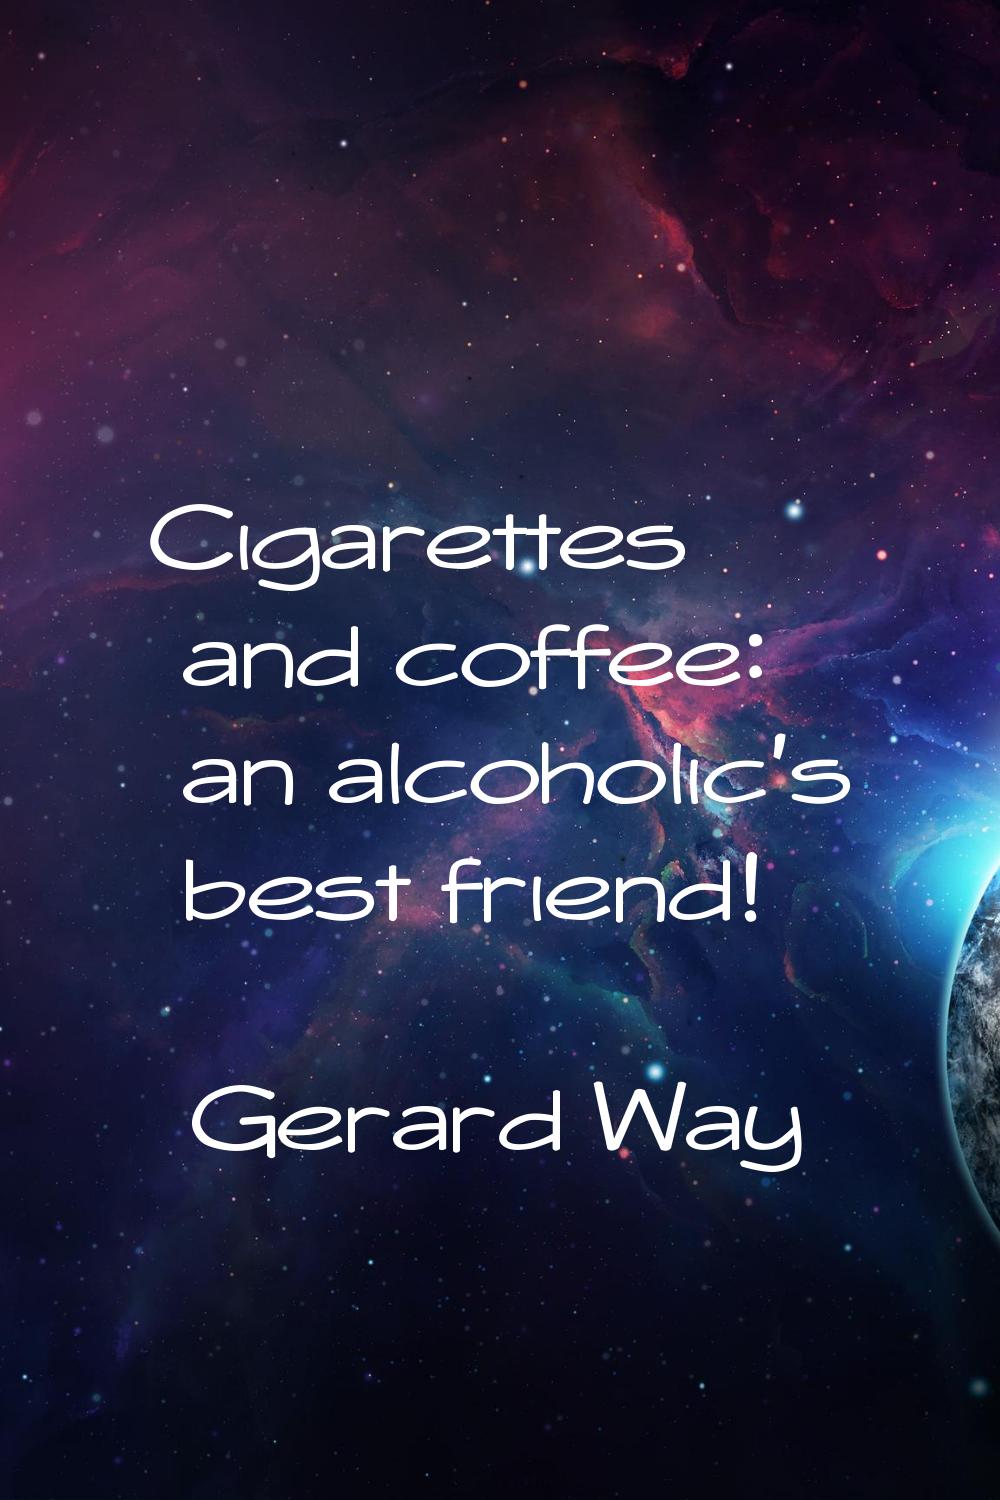 Cigarettes and coffee: an alcoholic's best friend!